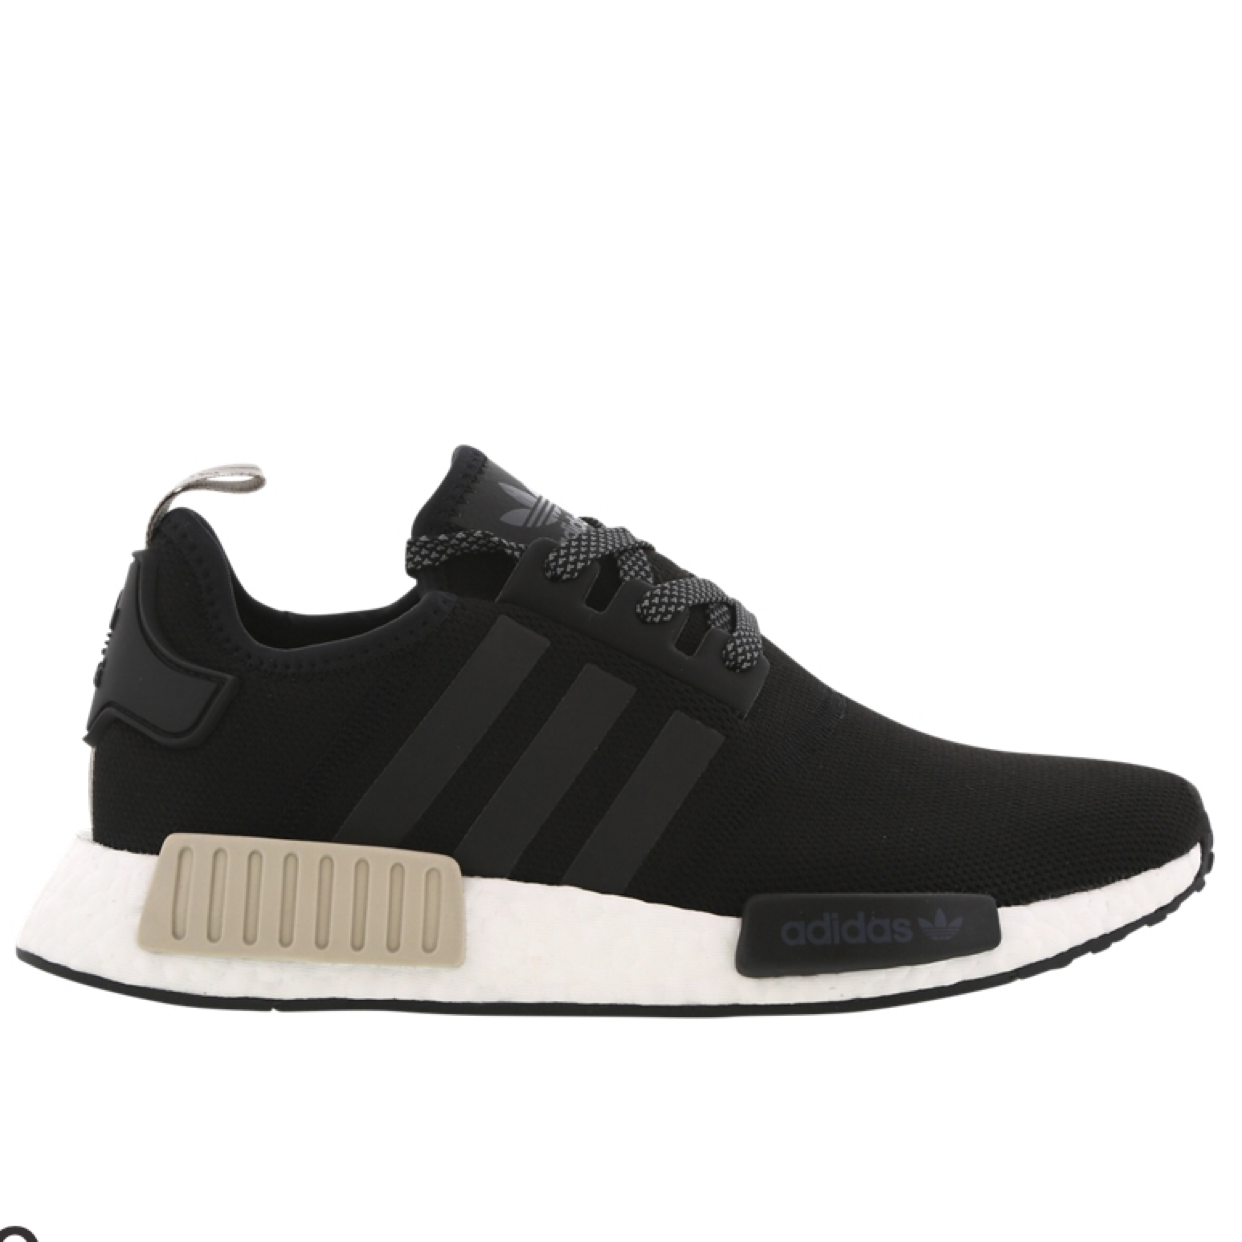 adidas NMD R1 - Women Shoes